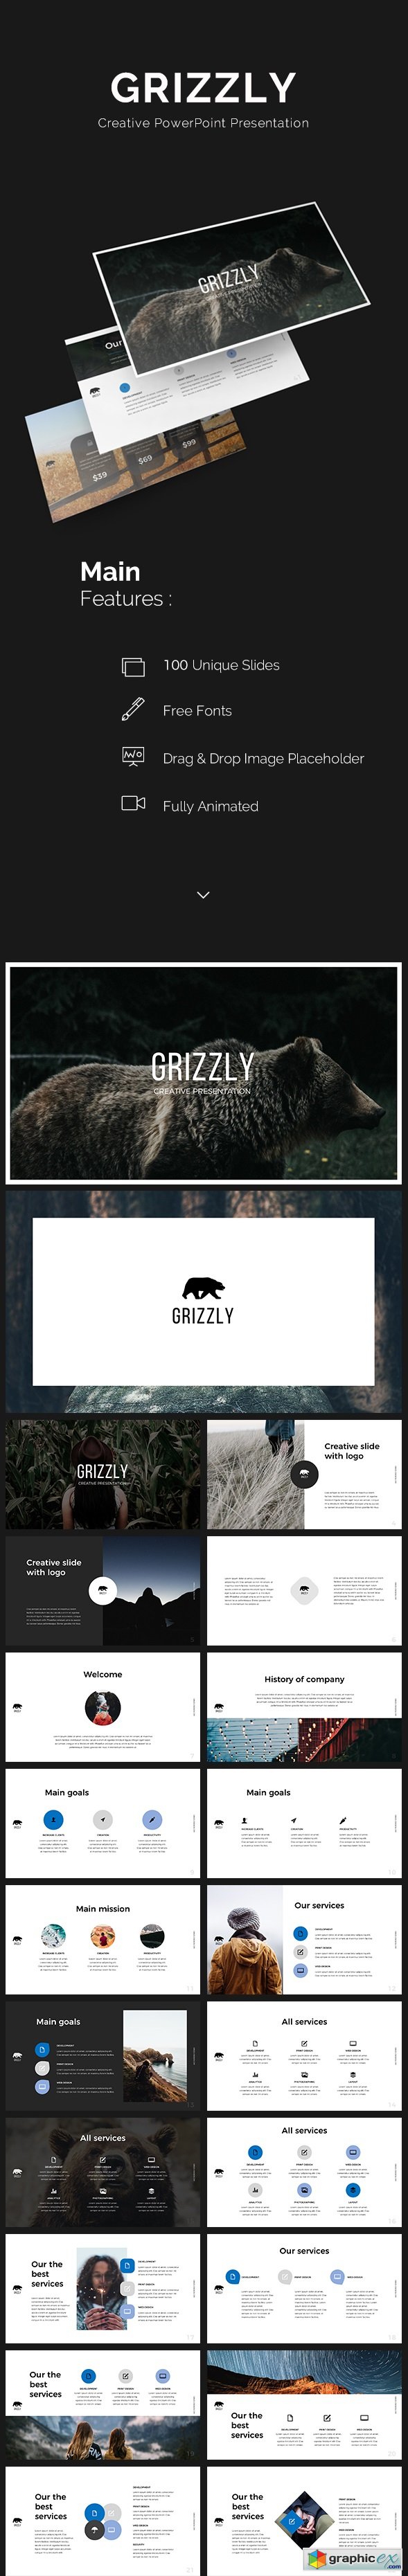 Grizzly PowerPoint Template